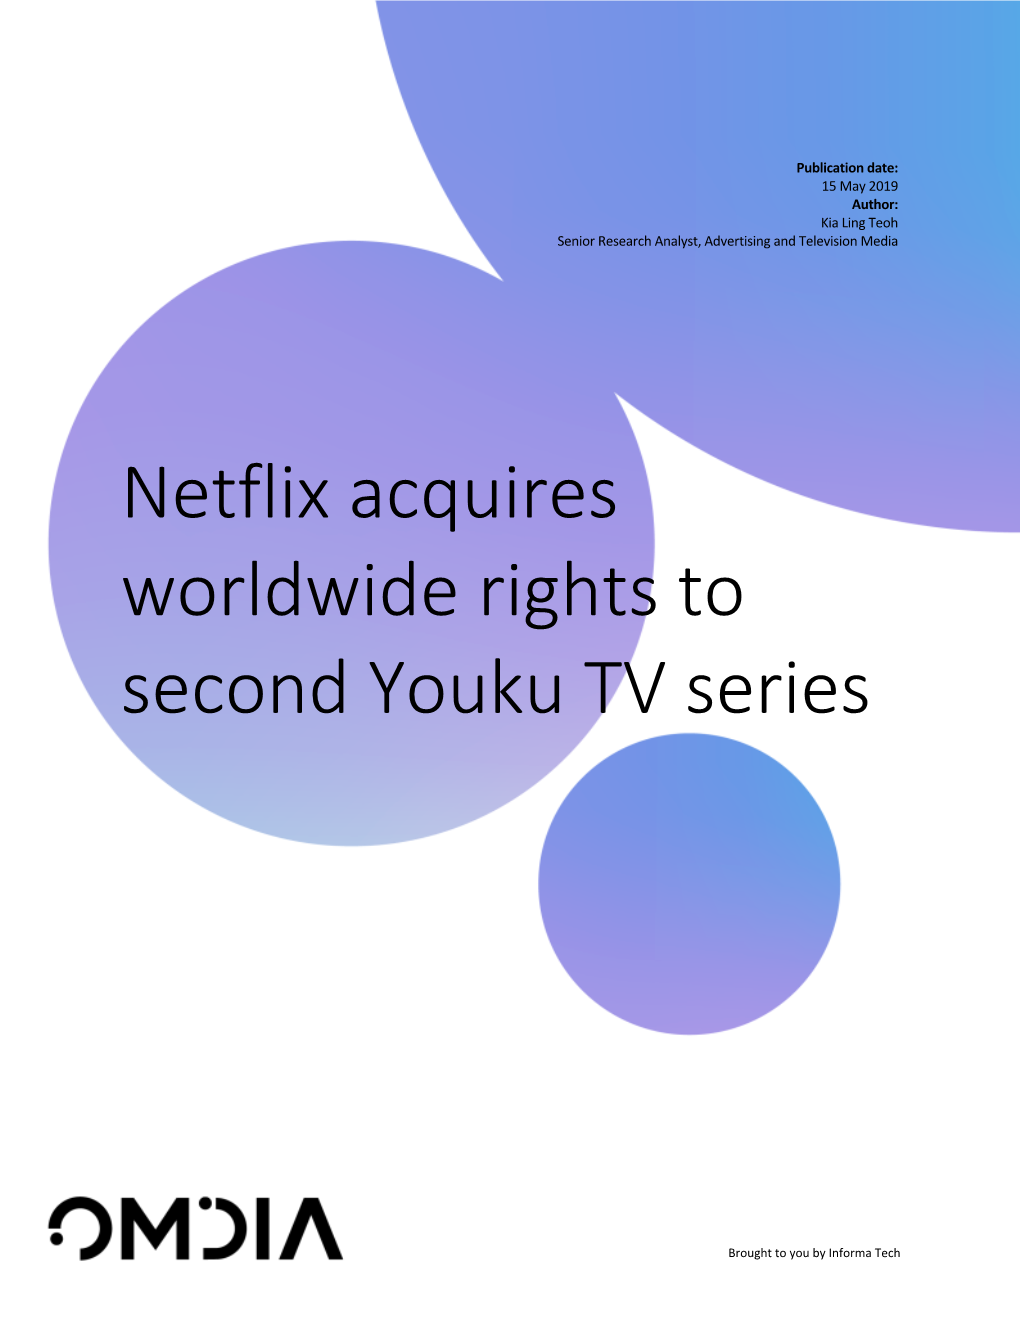 Netflix Acquires Worldwide Rights to Second Youku TV Series